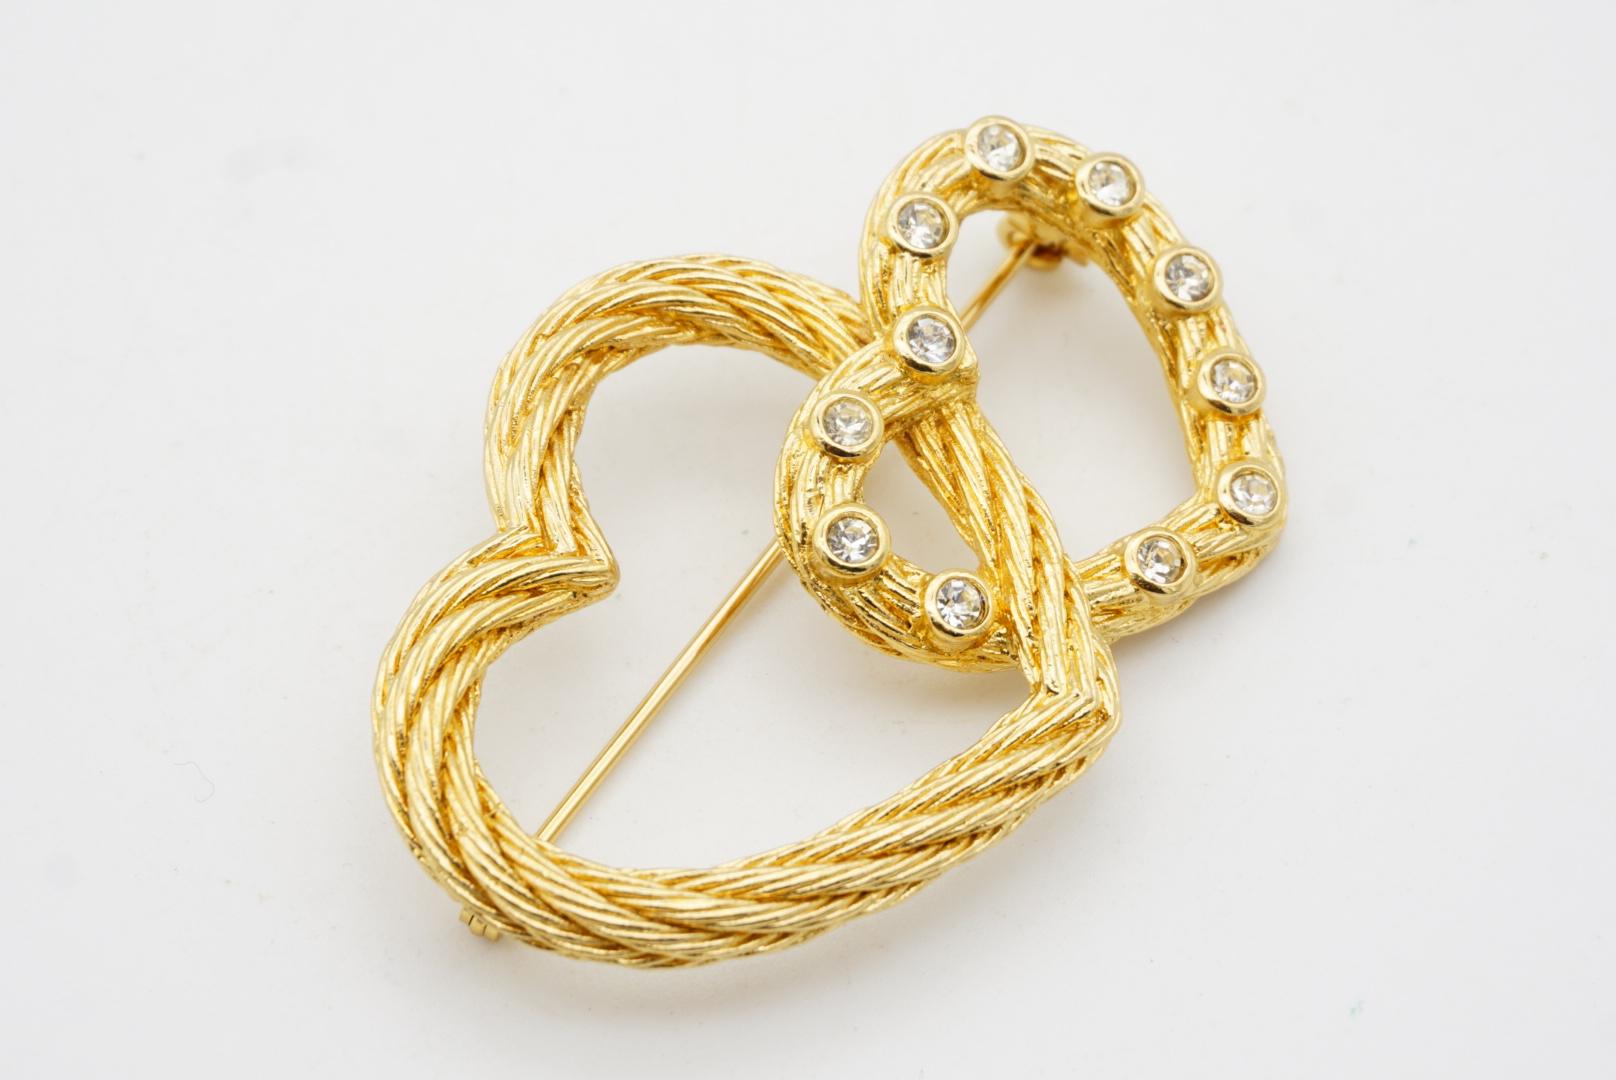 Christian Dior 1980s Vintage Large Double Heart Love Crystals Twist Rope Brooch For Sale 8